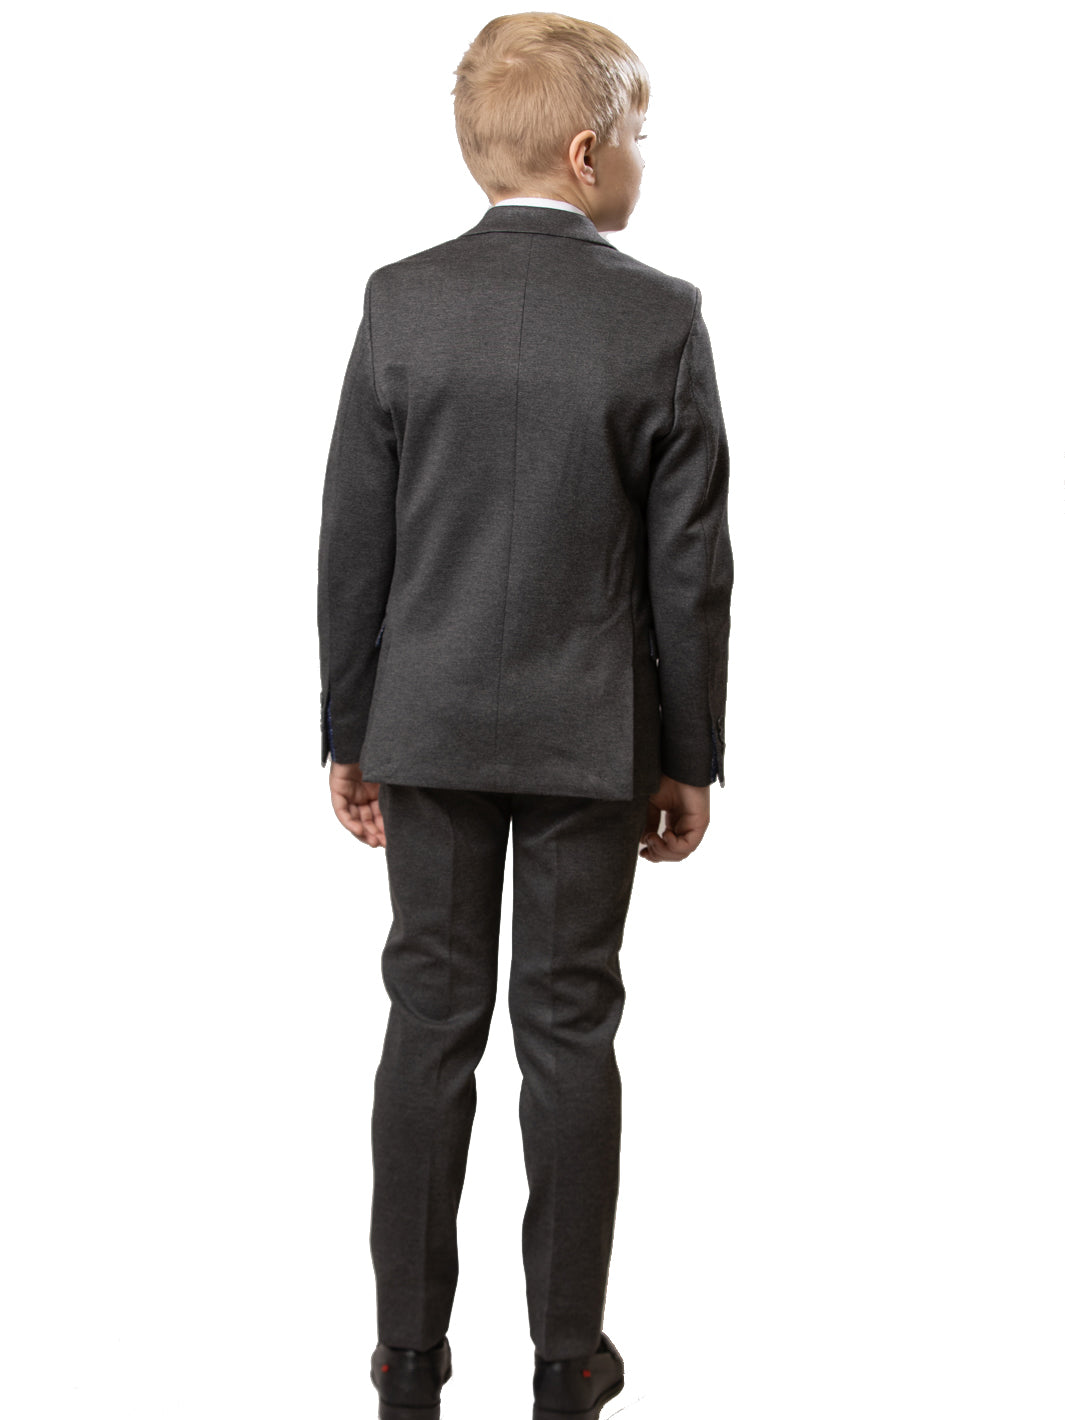 Charcoal Stretch Suit